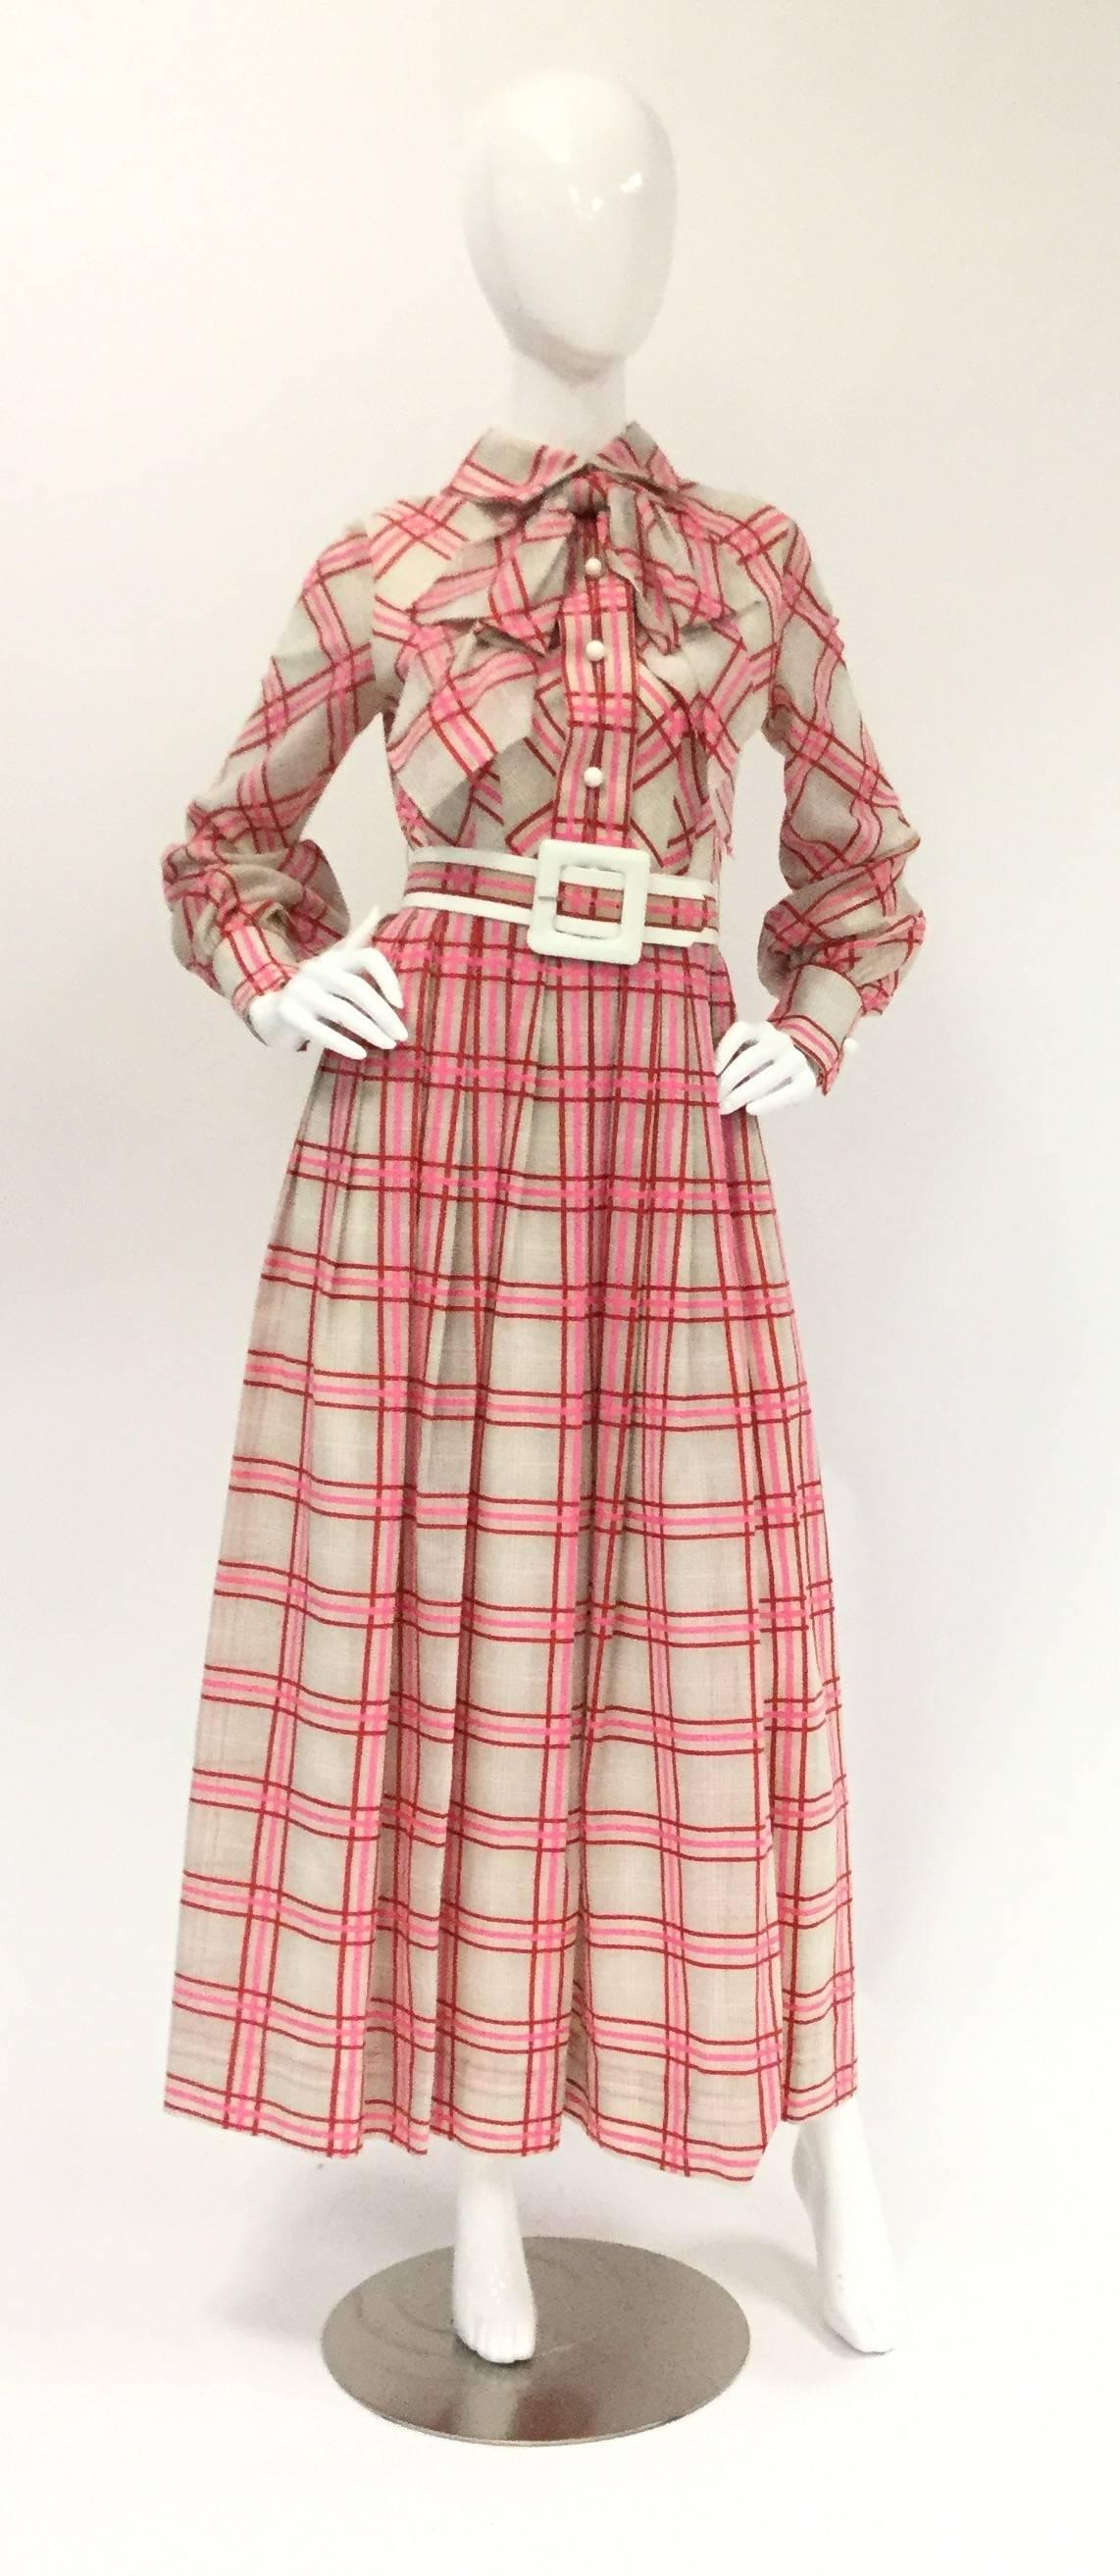 
1970s Sweet and charming floor length dress by Victor Costa! This simple and cute dress features bishop sleeves with buttoned cuffs and a button-up bodice with collar and large dramatic neck bow. The ensemble includes a chunky plaid belt with white